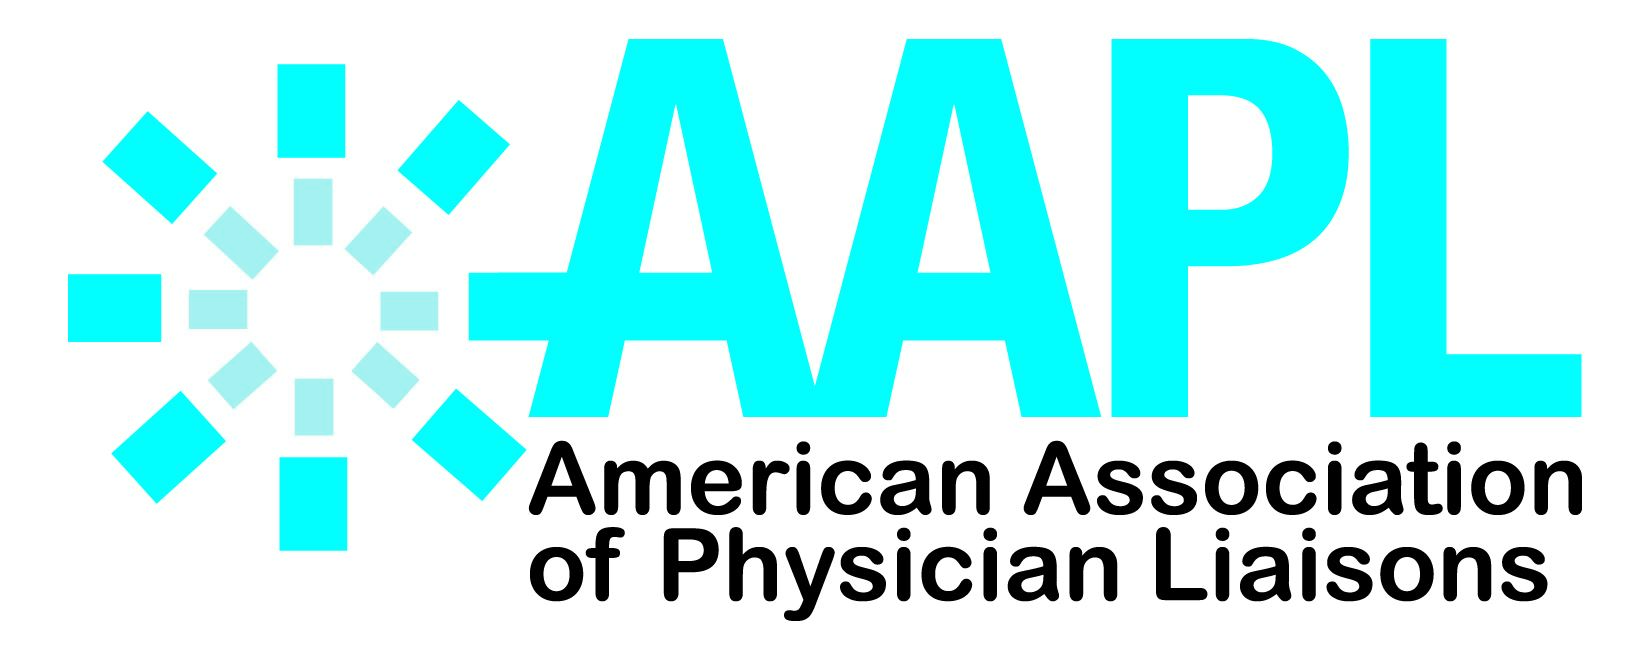 American Association of Physician Liaisons, Inc. 20232024 AAPL